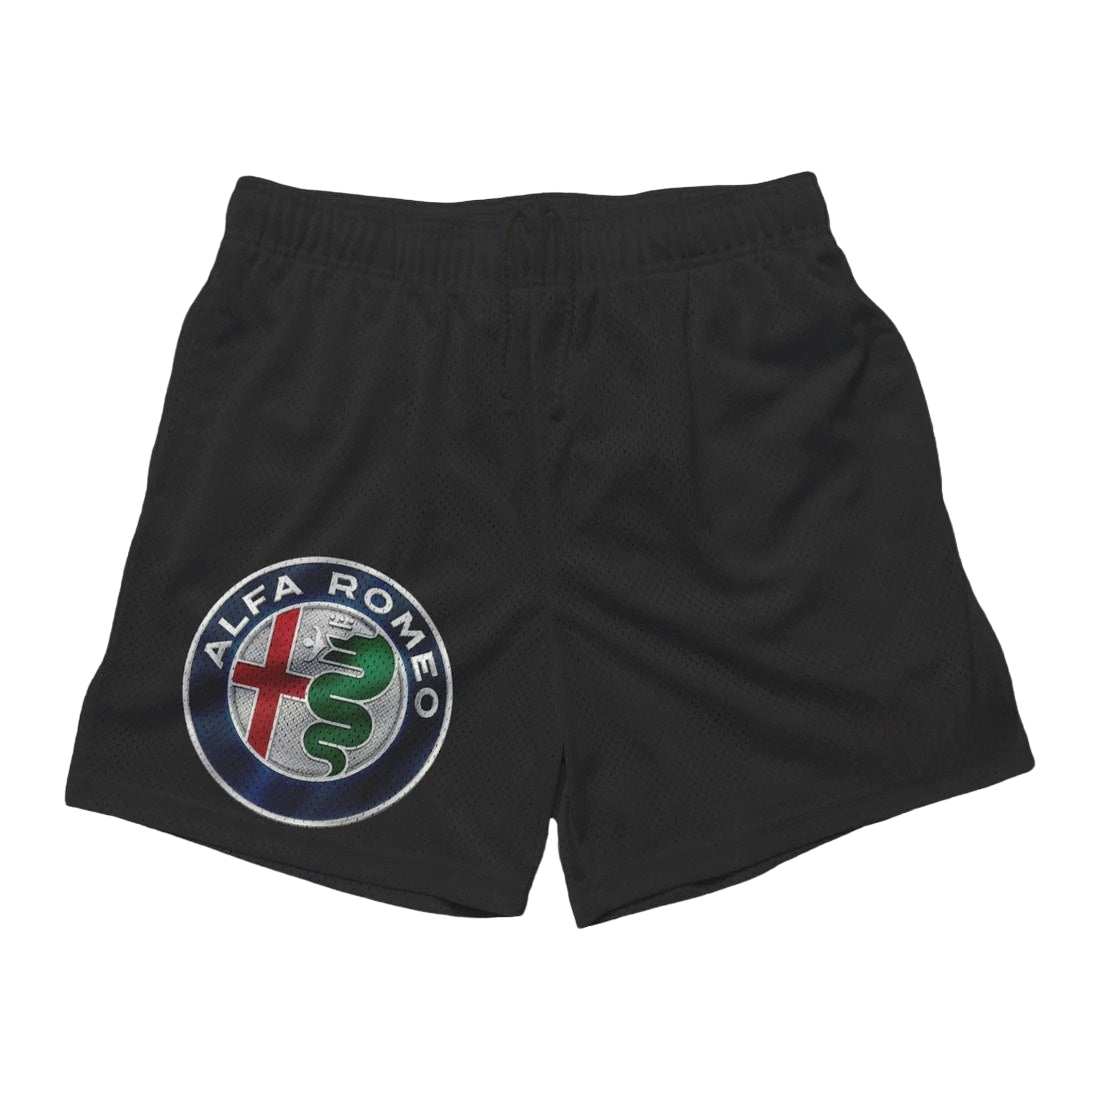 a black shorts with the logo of a soccer team